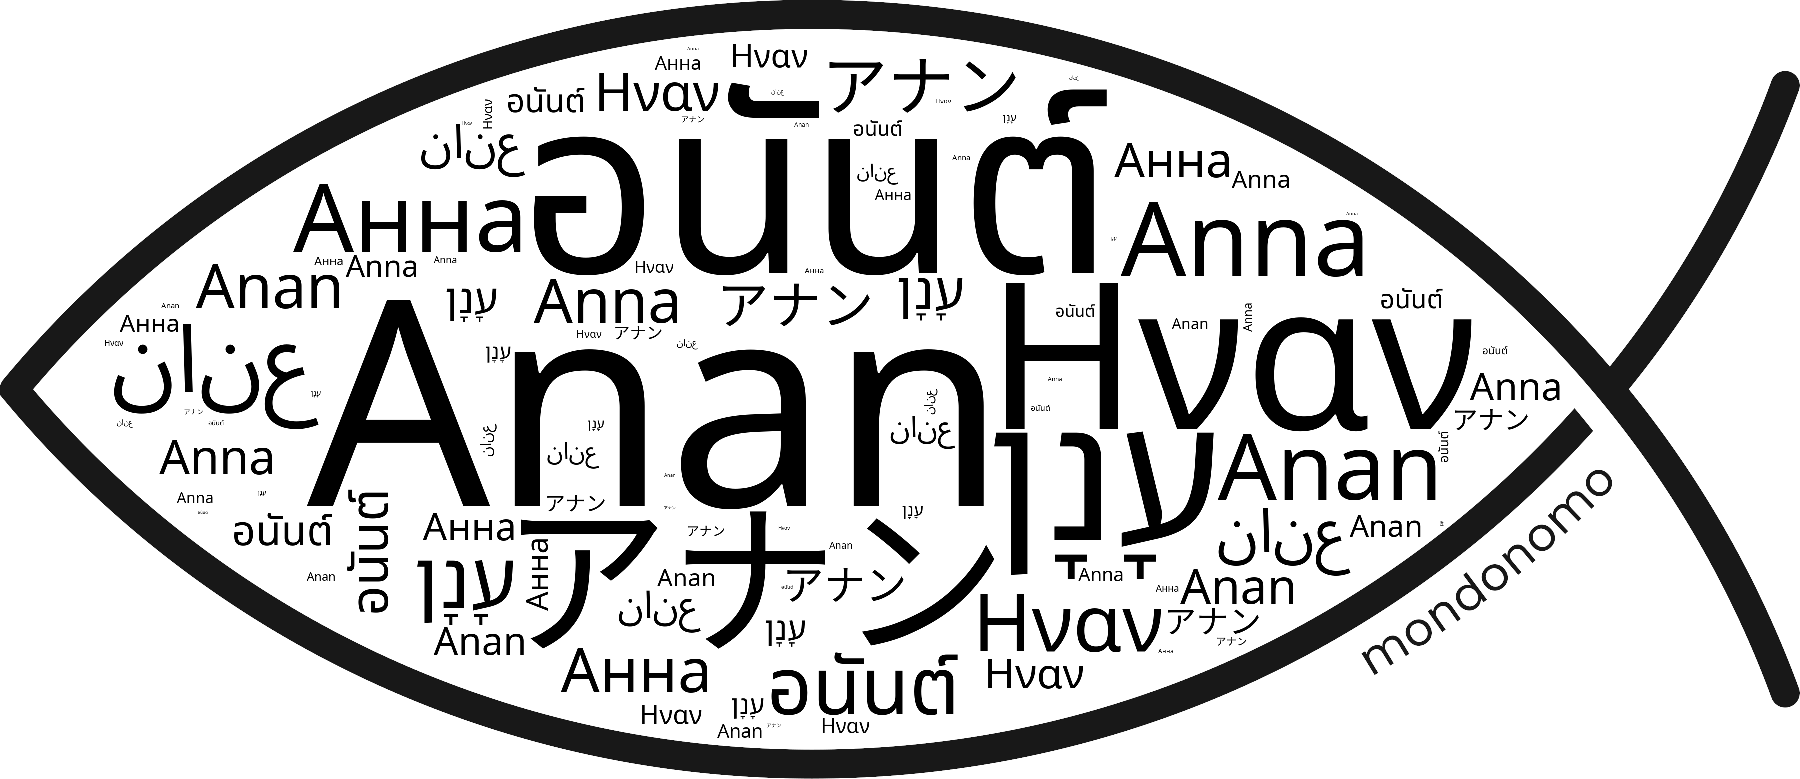 Name Anan in the world's Bibles